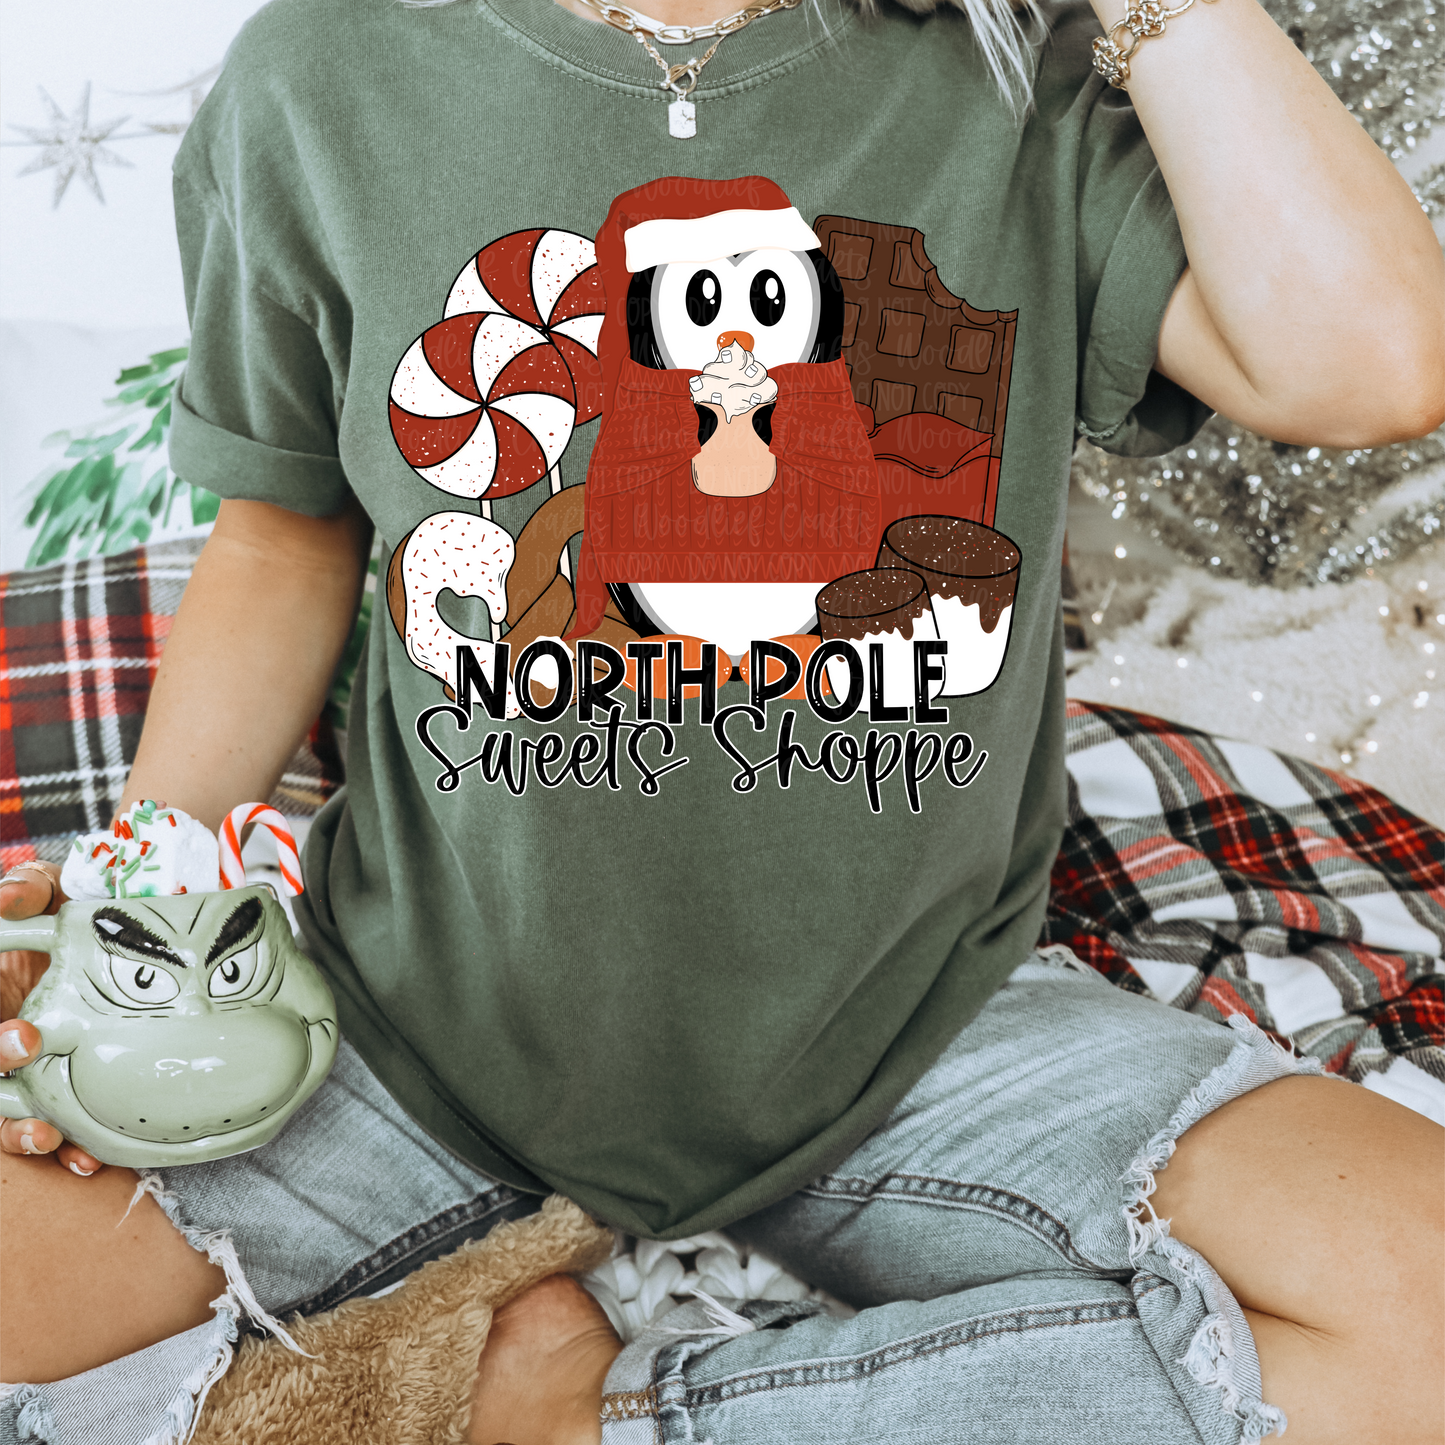 North Pole Sweets Shoppe Digital Download